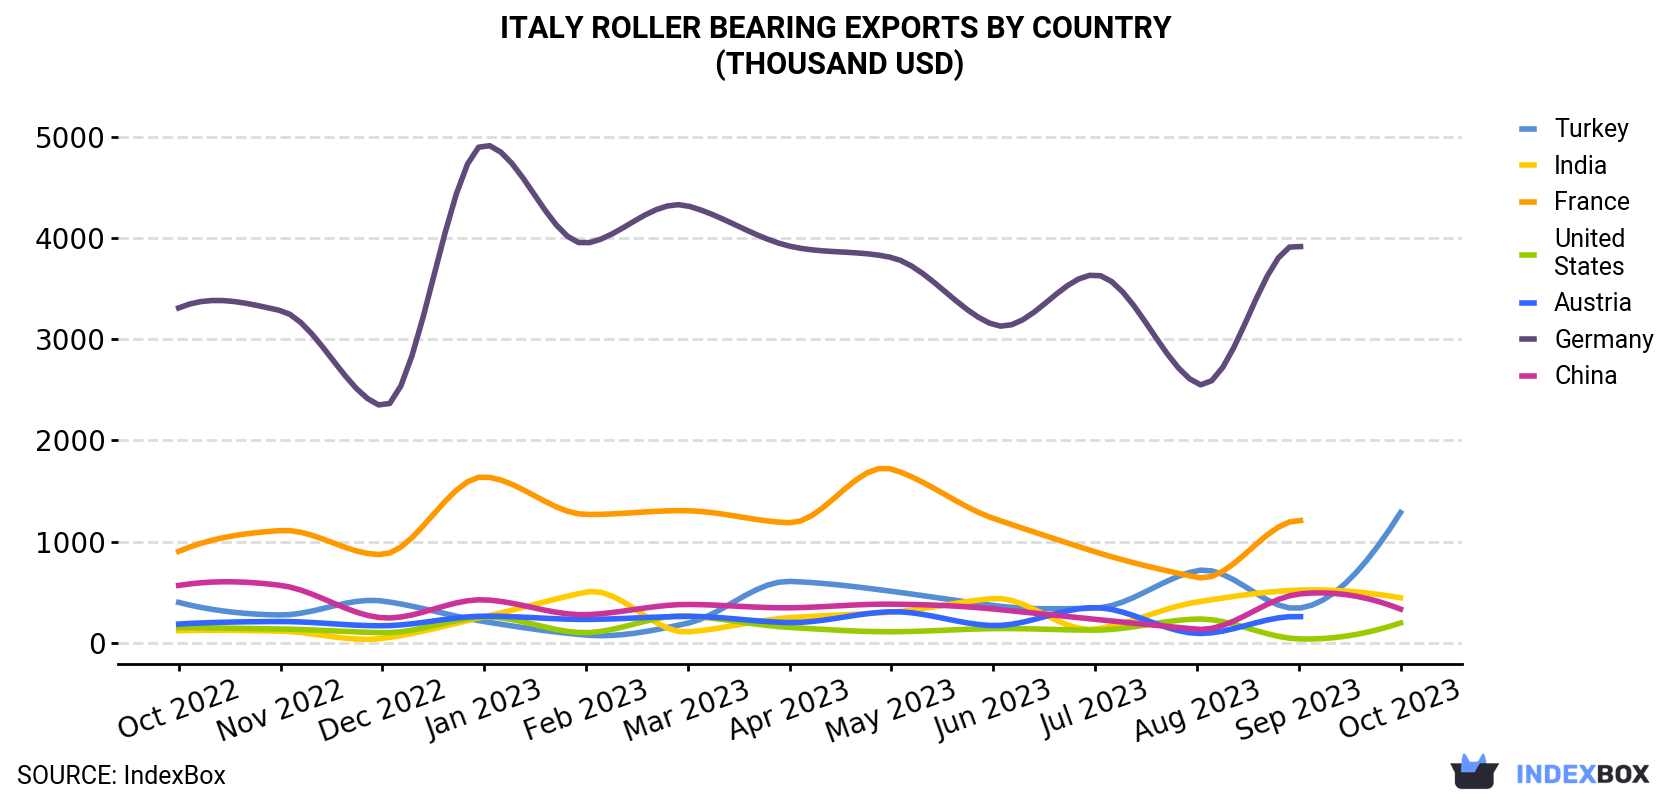 Italy Roller Bearing Exports By Country (Thousand USD)